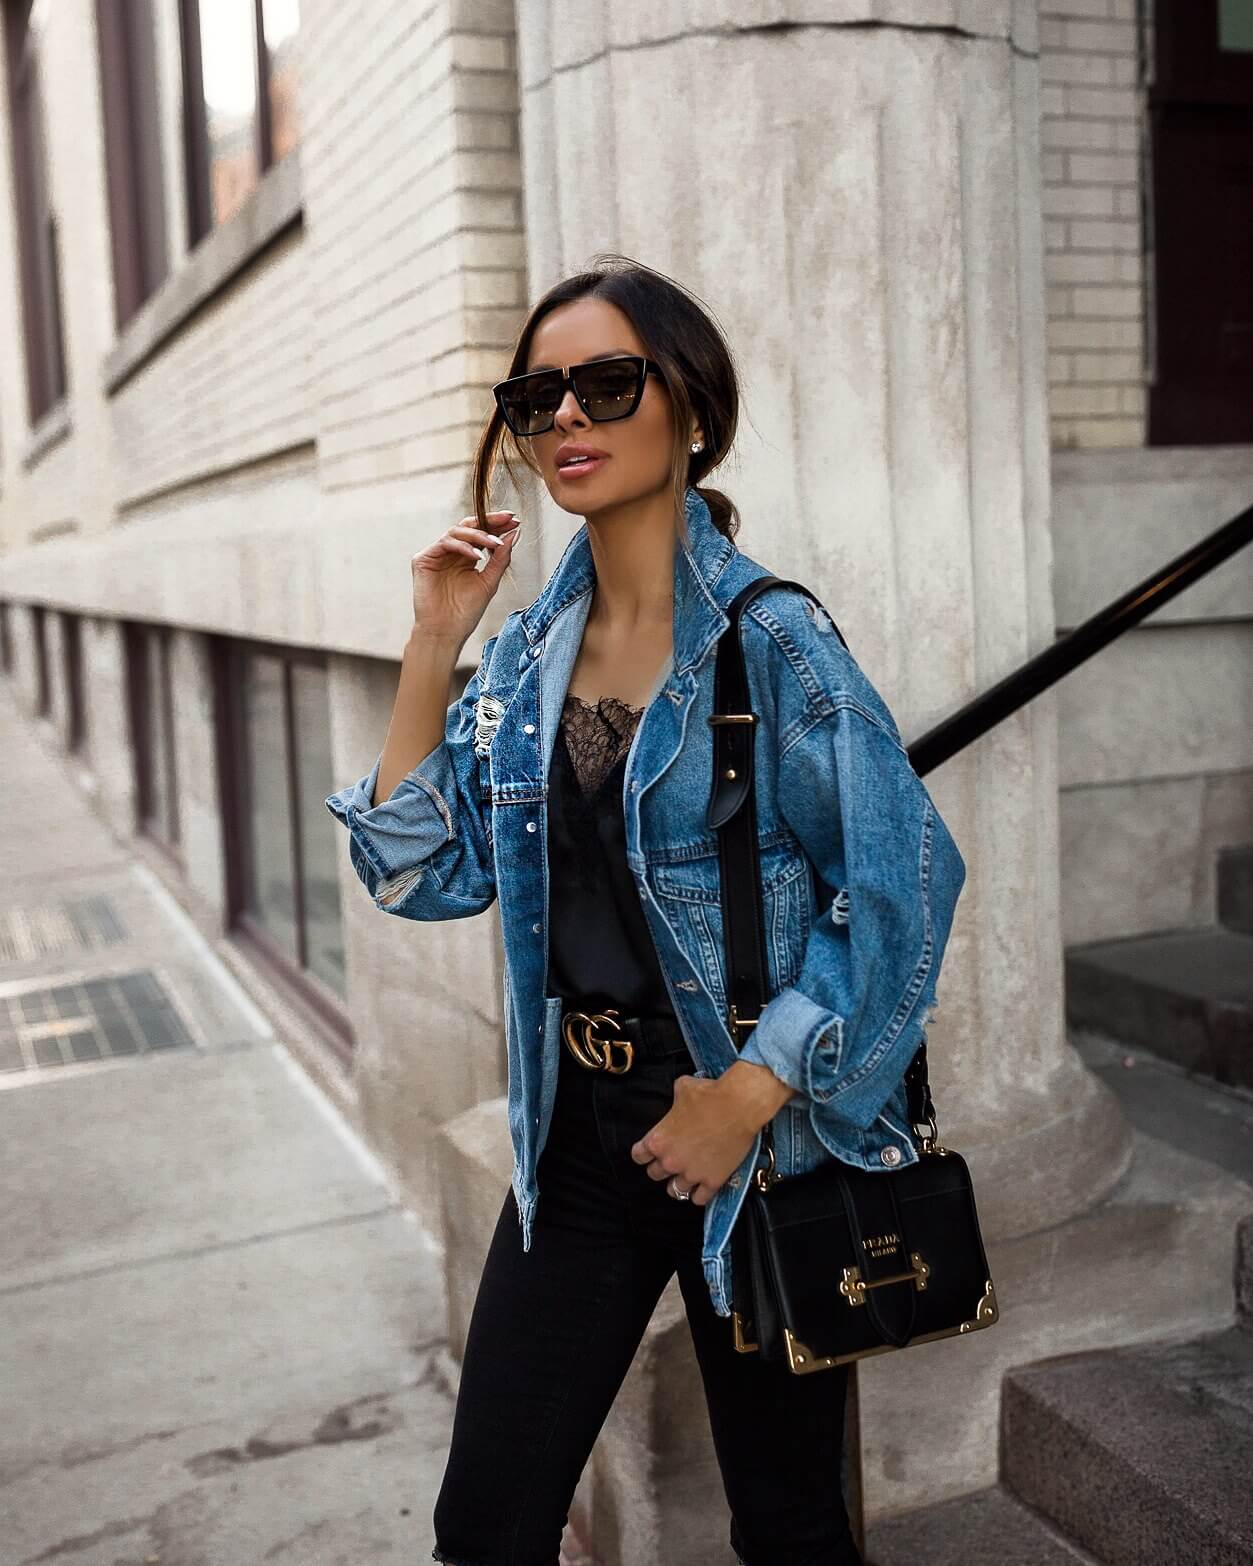 fashion blogger mia mia mine wearing a denim jacket and gucci belt for spring 2019